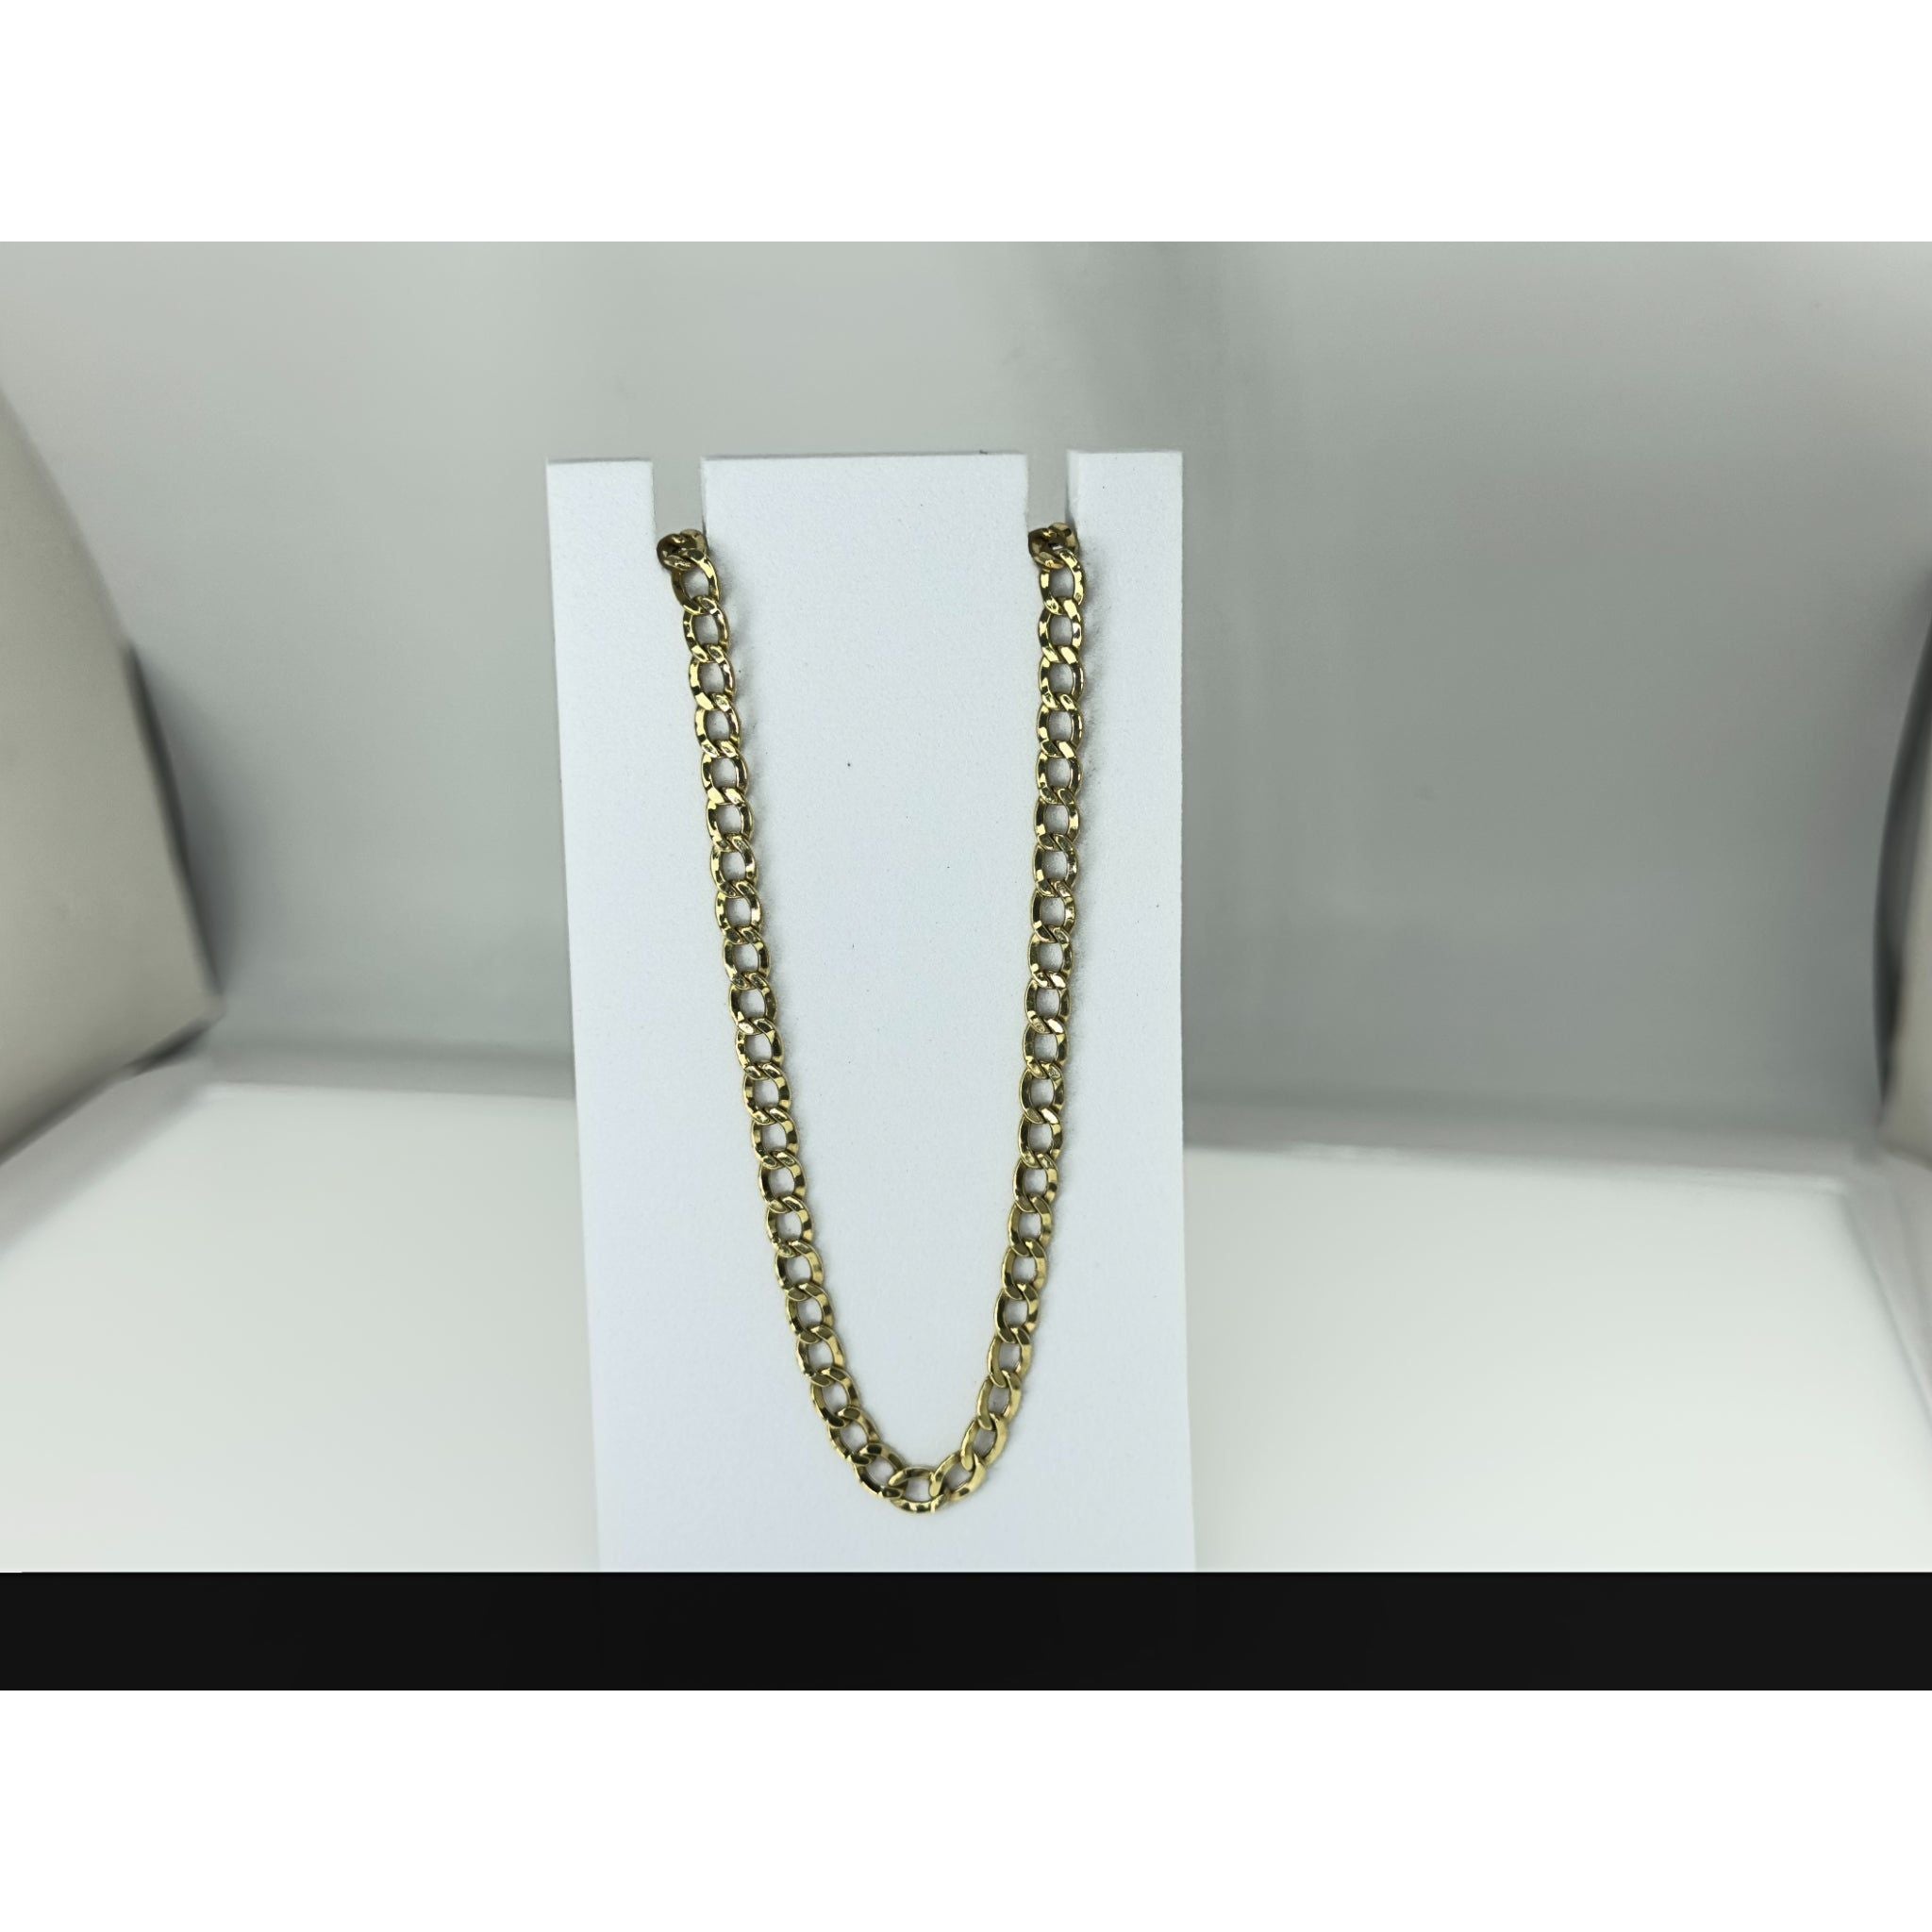 DR1739 - 10K Yellow Gold - Men's Gold Chains